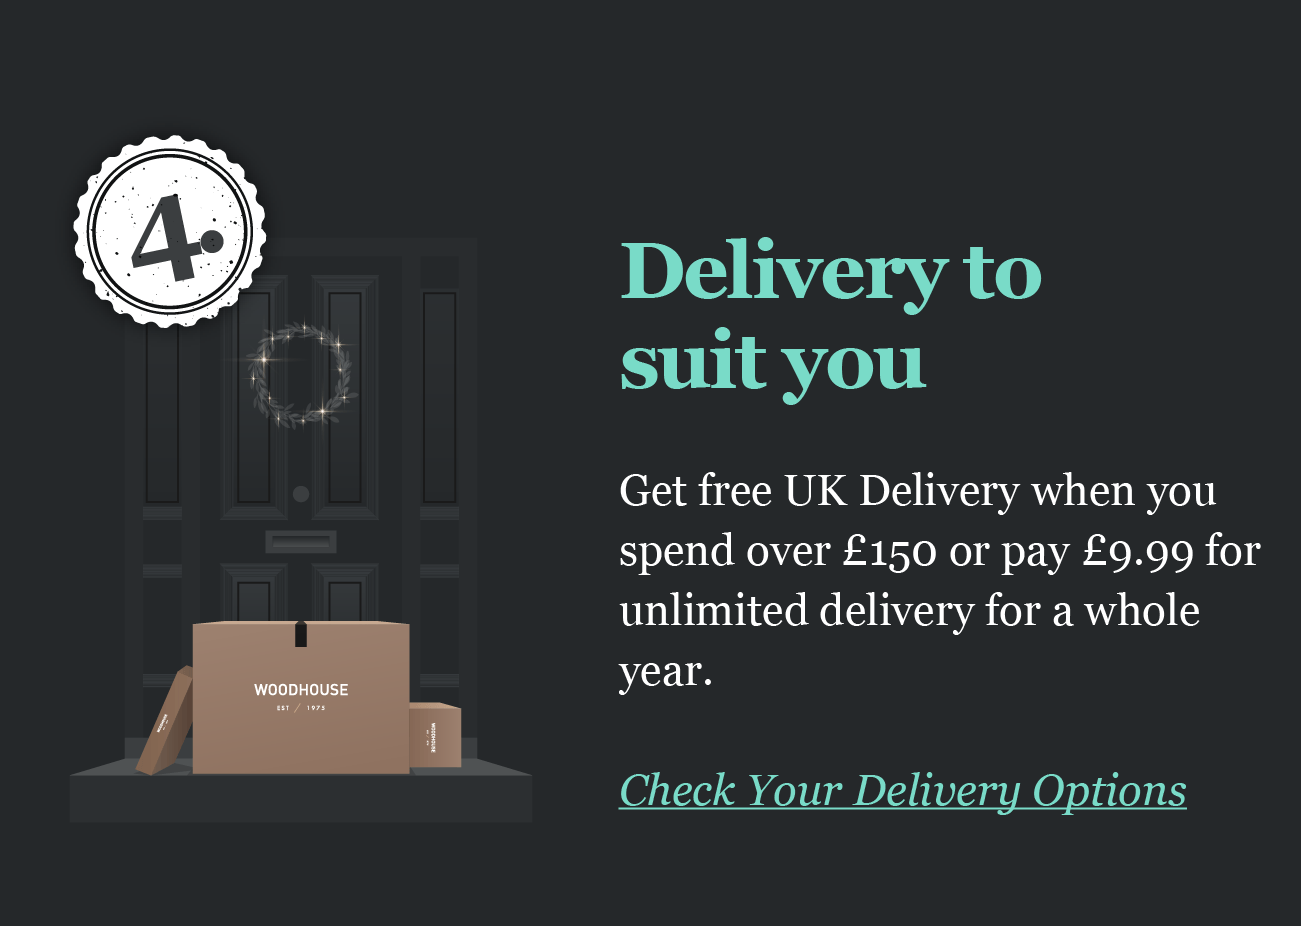 4.
Delivery to
suit you

Get free UK Delivery when you
spend over ?150 or pay ?9.99 for
unlimited delivery for a whole
year.

Check Your Delivery Options
